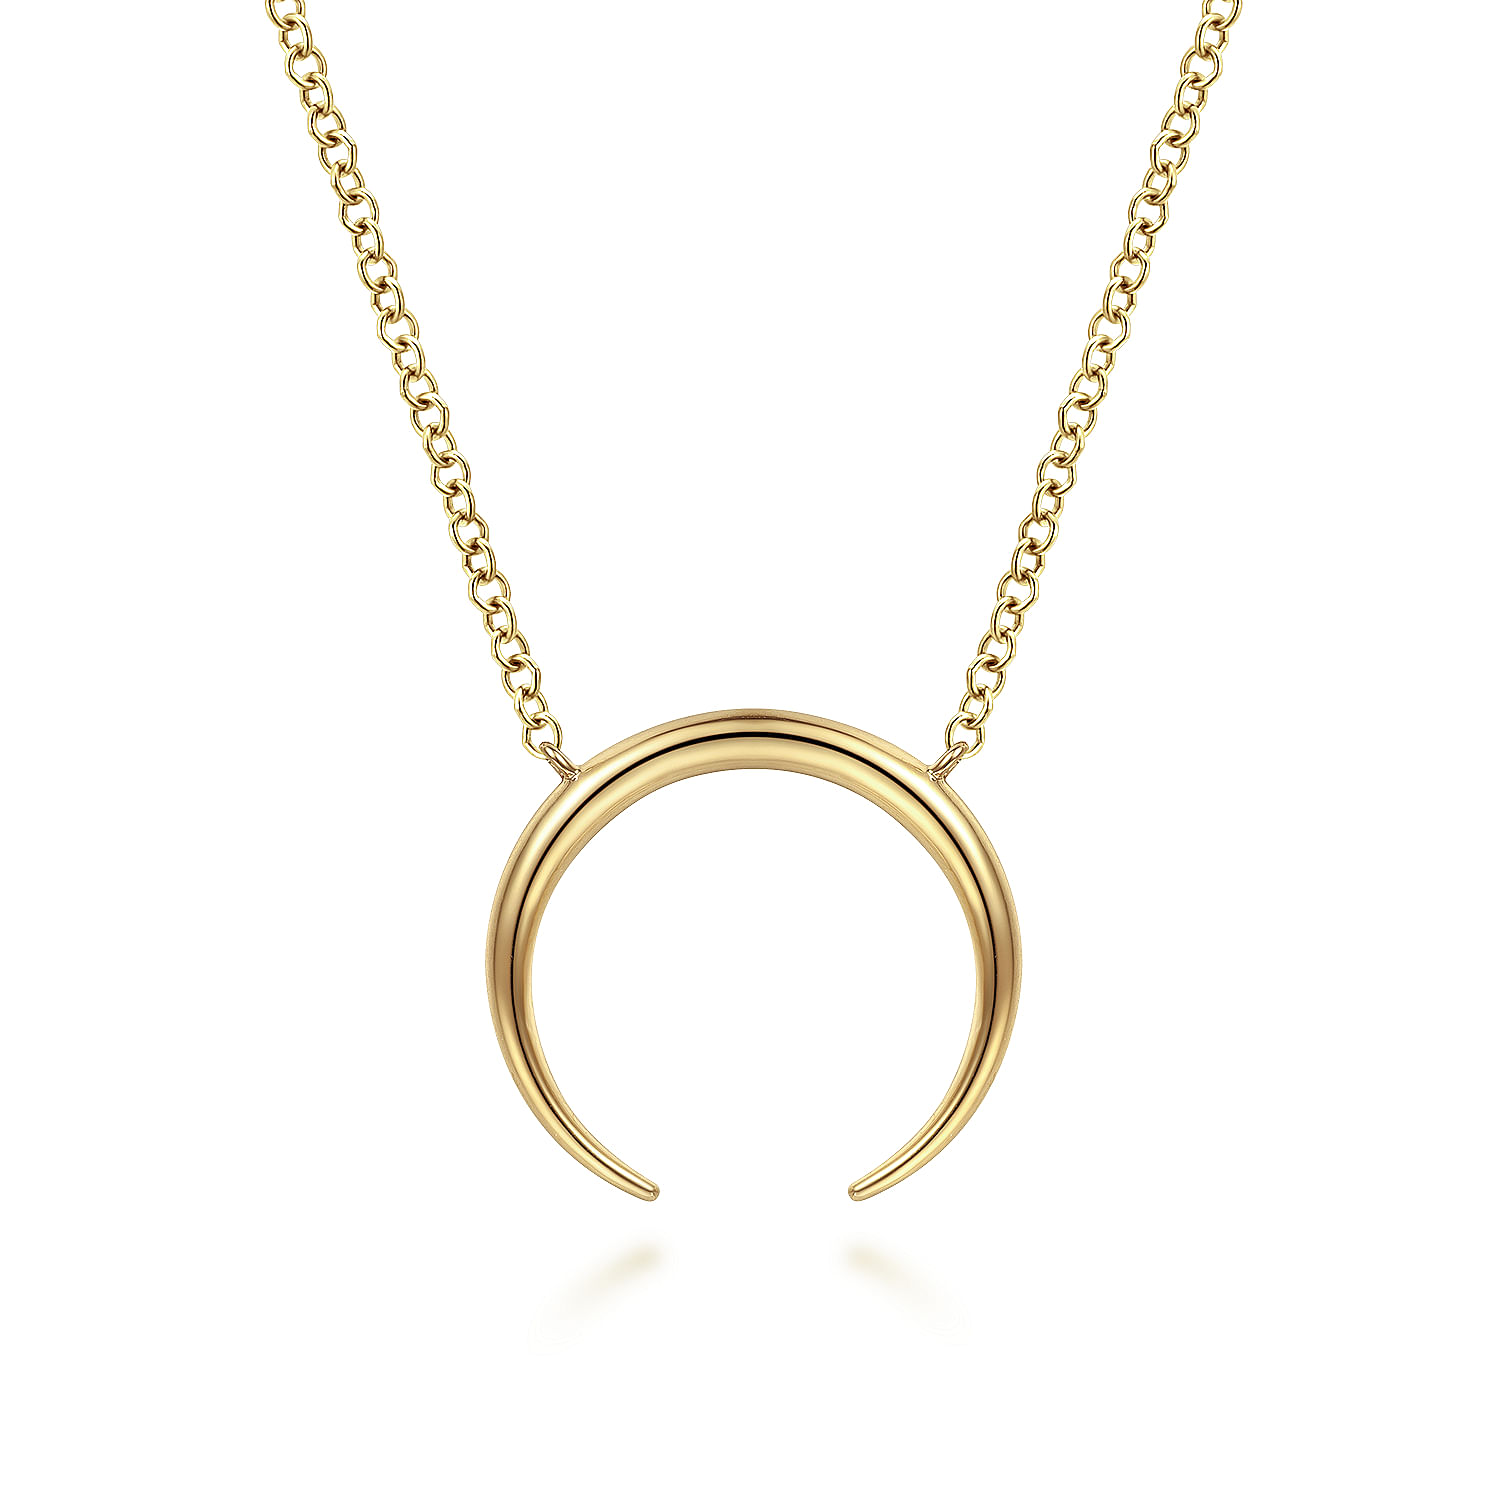 14K Yellow Gold Crescent Moon Pendant Necklace